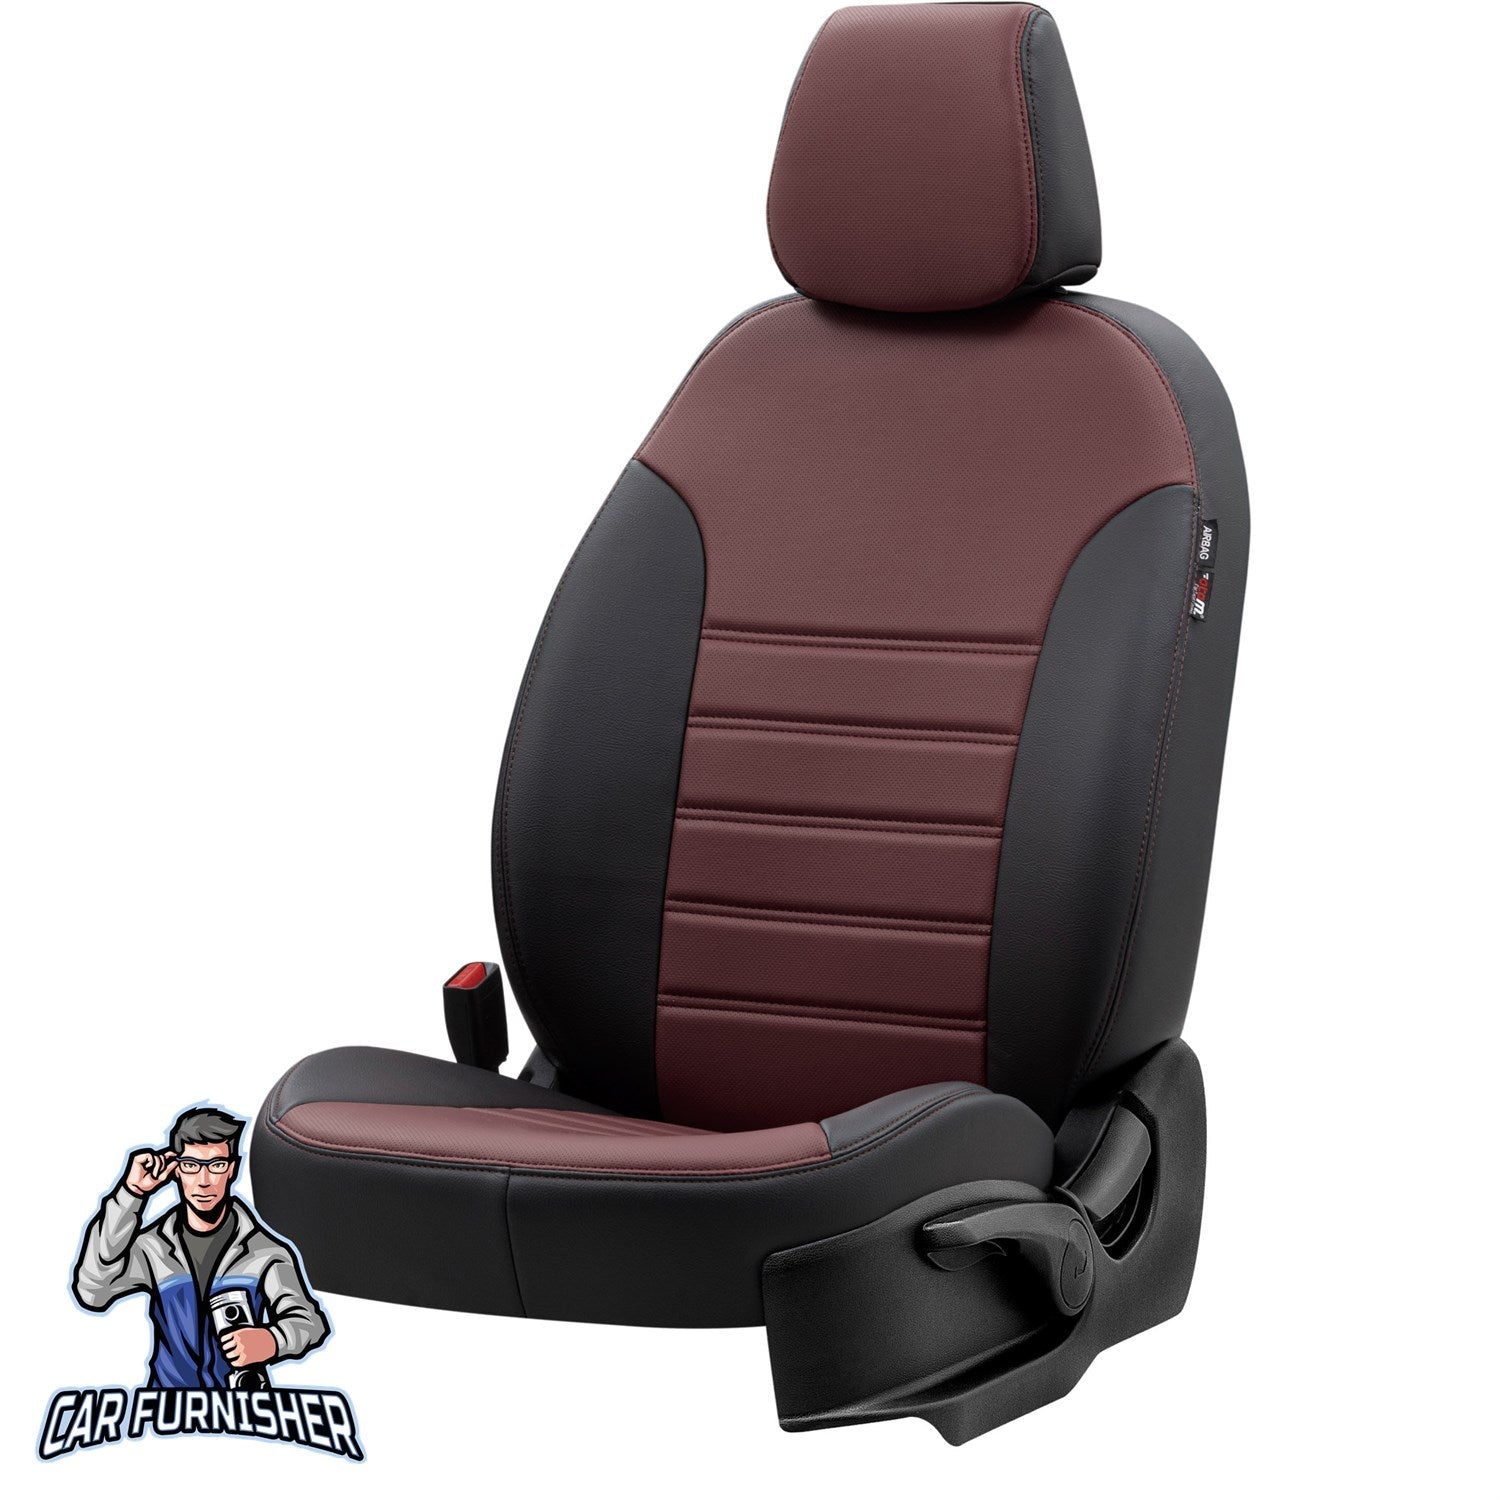 Mini Countryman Seat Covers Istanbul Leather Design Burgundy Leather